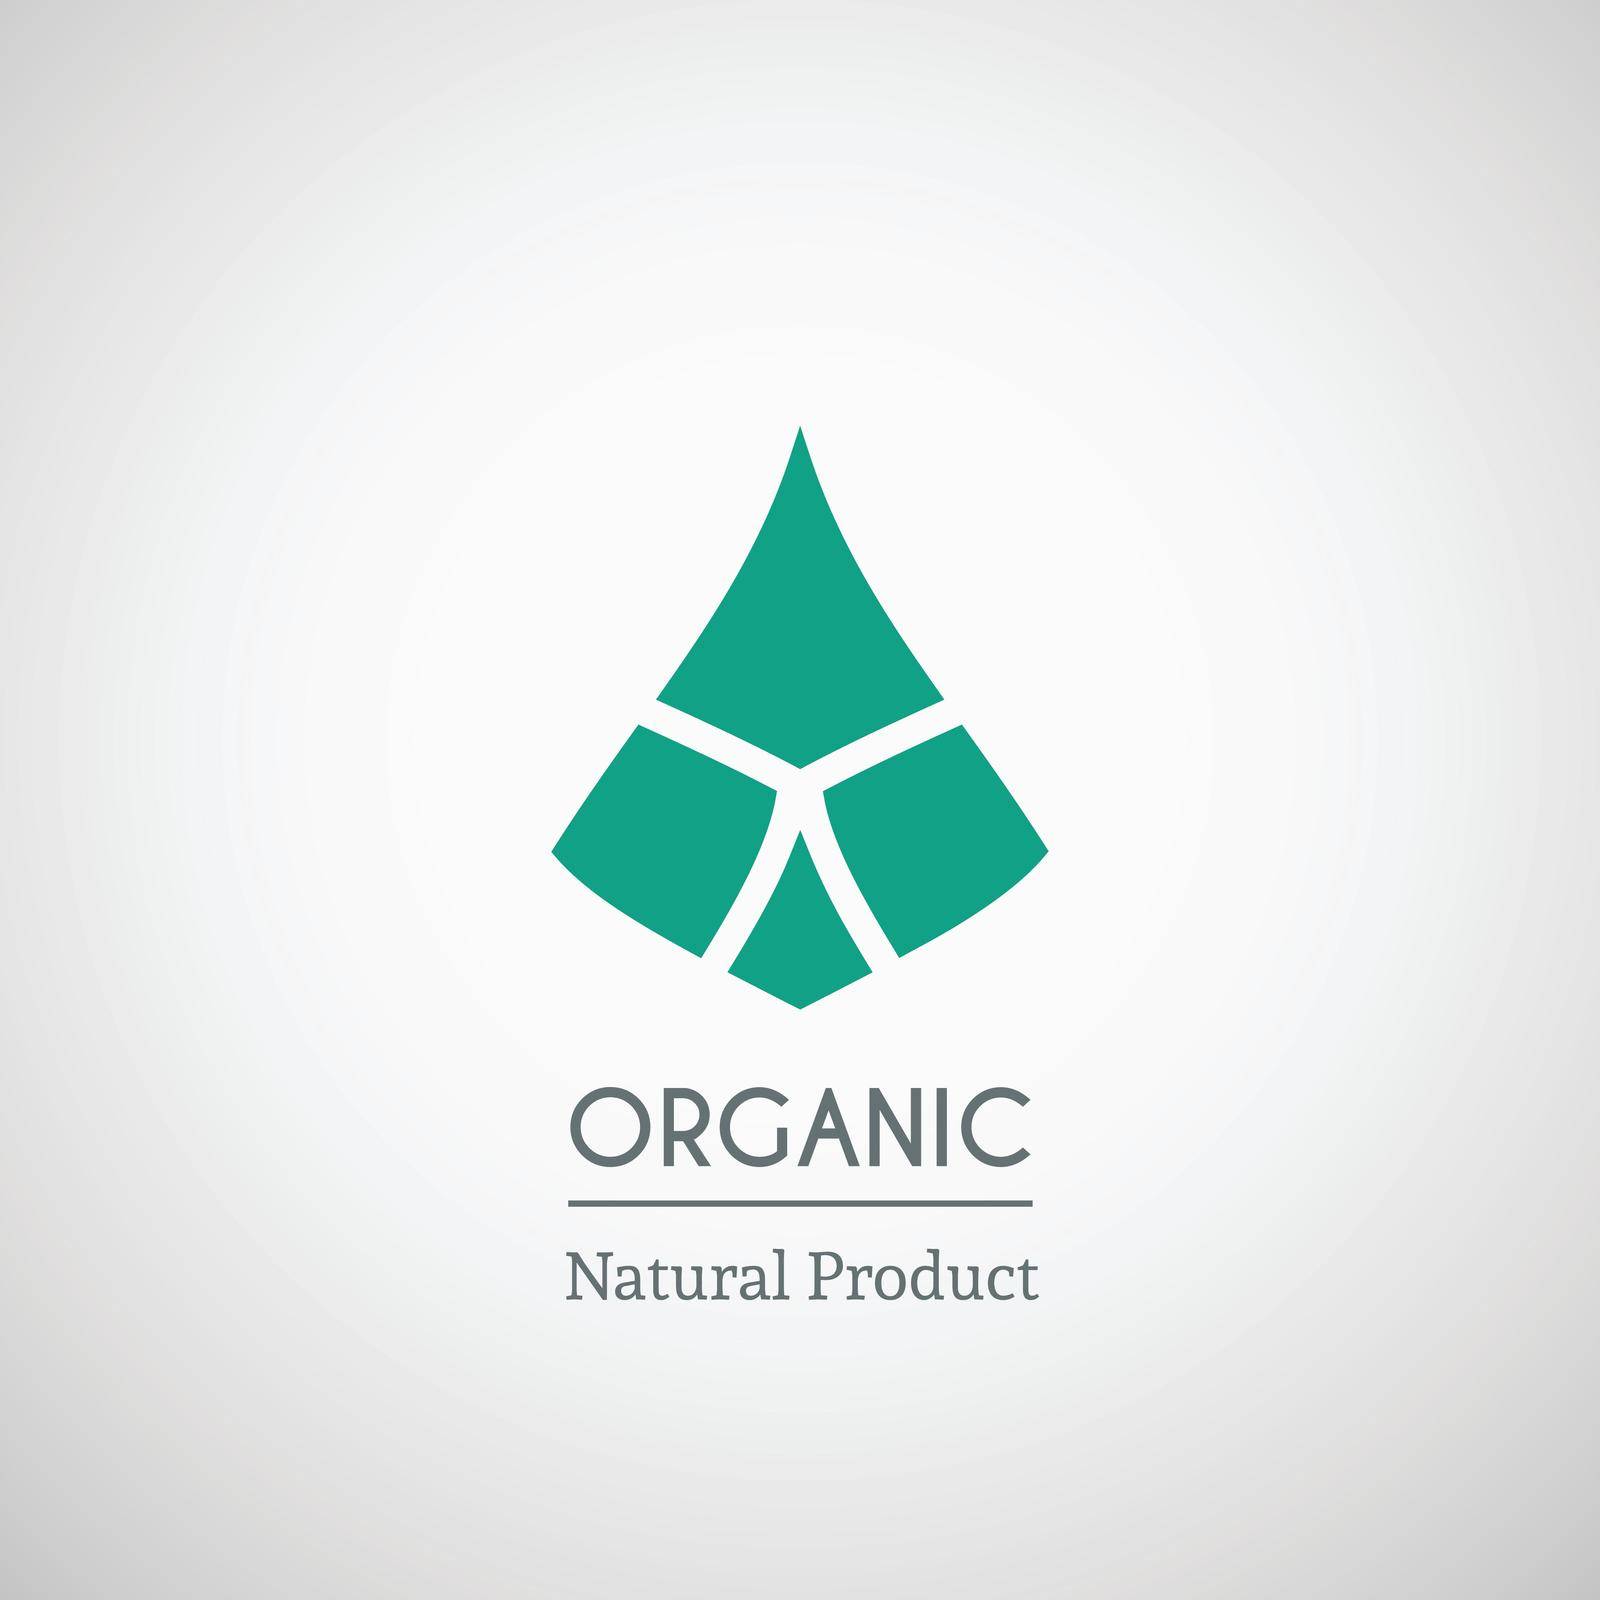 Organic natural product logo by dacascas